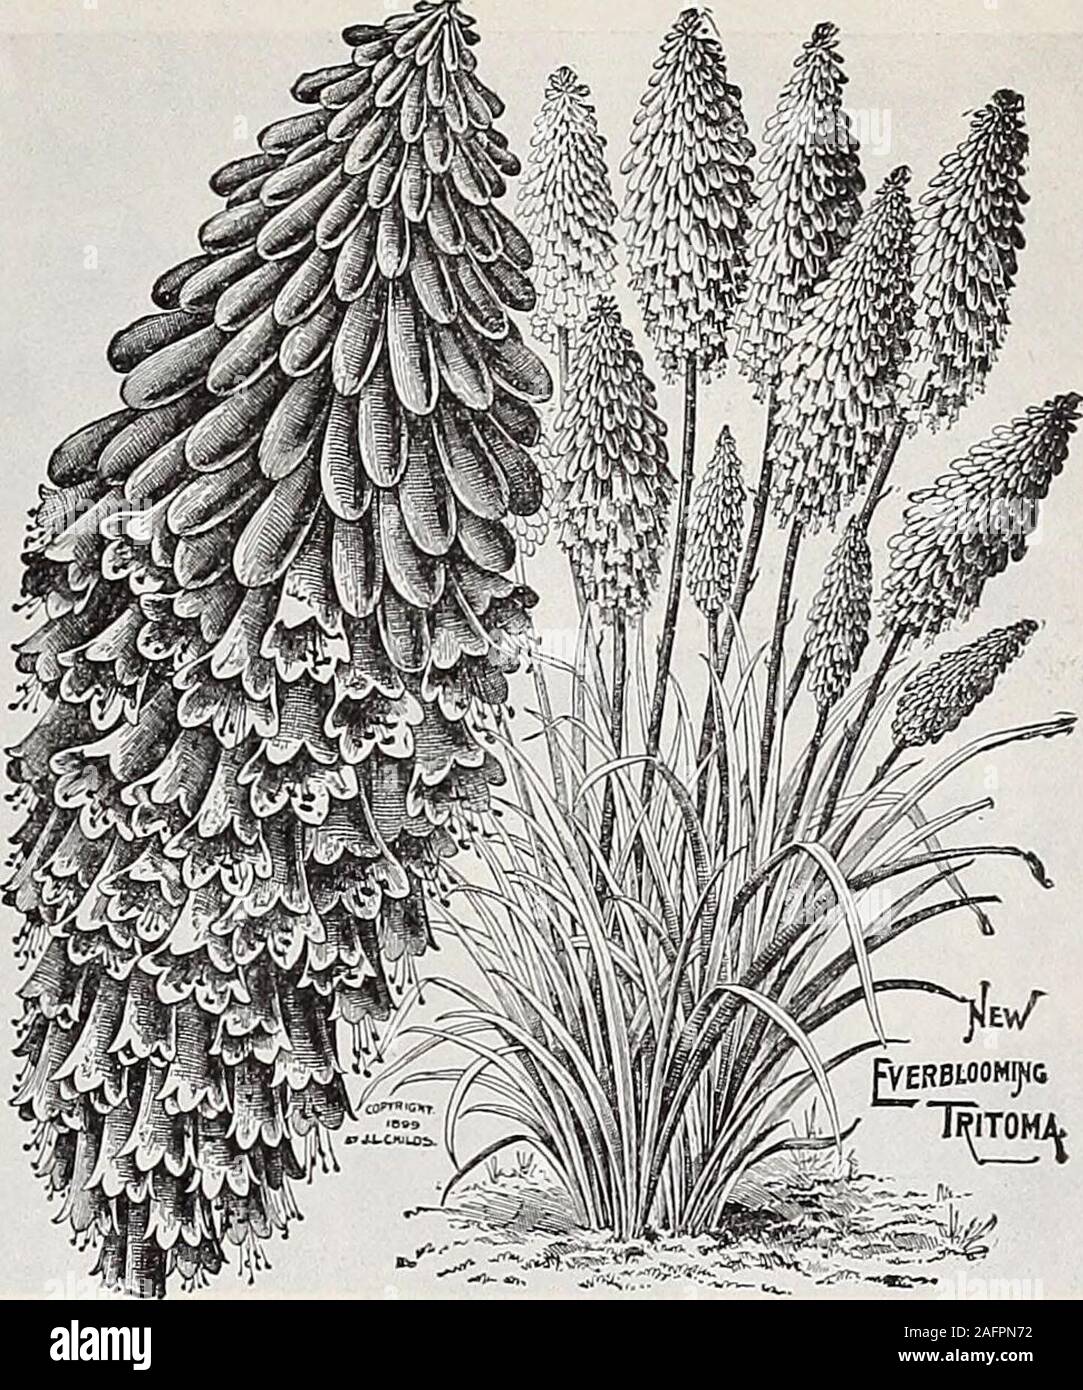 . Dreer's wholesale price list : seeds for florists plants for florists bulbs for florists vegetable seeds, fungicides, fertilizers, insecticides implements, sundries, etc. TROLLIUS (Globe Flower). TRITOMA PFITZERII (Red Hot Poker Plant) Tiarella. (Foam Flower.) Per doz. Per 100 Cordifolia. 3-inch pots $1 25 $9 00 Purpurea Major. 4-inch pots i 25 8 00 TricyrtiS. (Japanese Toad Lily.) Hirta. 4-inch pots i 25 8 00 Macropoda Striata. 3-inch pots i 25 8 00 Tunica. Saxifraga. 3-inch pots 100 700 Valeriana. (Valerian.) Coccinea. -t-inch pots i 25 8 00 Alba. 4-inch pots i 25 8 00 Officinalis. 3-inch Stock Photo